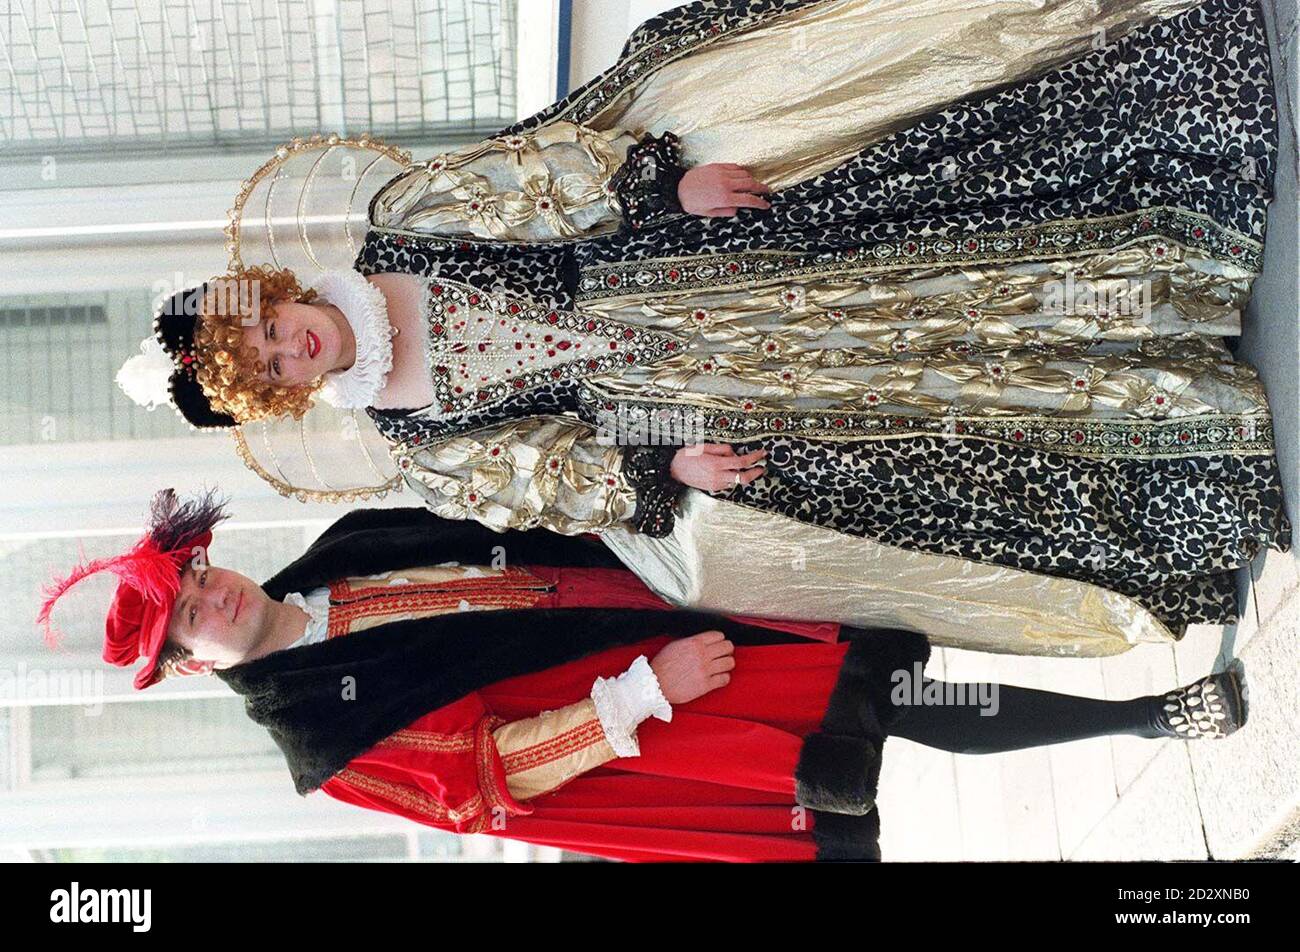 Emma Simpson and Edward Plackett model Elizabeth 1 and Henry VIII costumes, in London today (Thurs), as part of a huge collection of over 700 theatrical and fancy dress costumes, which will go under the hammer at Phillips, in Bayswater, on April 15. The jewelled dress is reputed to have been worn by Glenda Jackson in her role as Elizabeth I, and hopes to fetch 275-300 with the Henry VIII costume estimated at 175-200. Photo by Rebecca Naden. 15/04/97: The jewelled Elizabeth I gown believed to have been worn by actress Glenda Jackson in the hugely popular TV drama Elizabeth R, sold for 1,375, Stock Photo